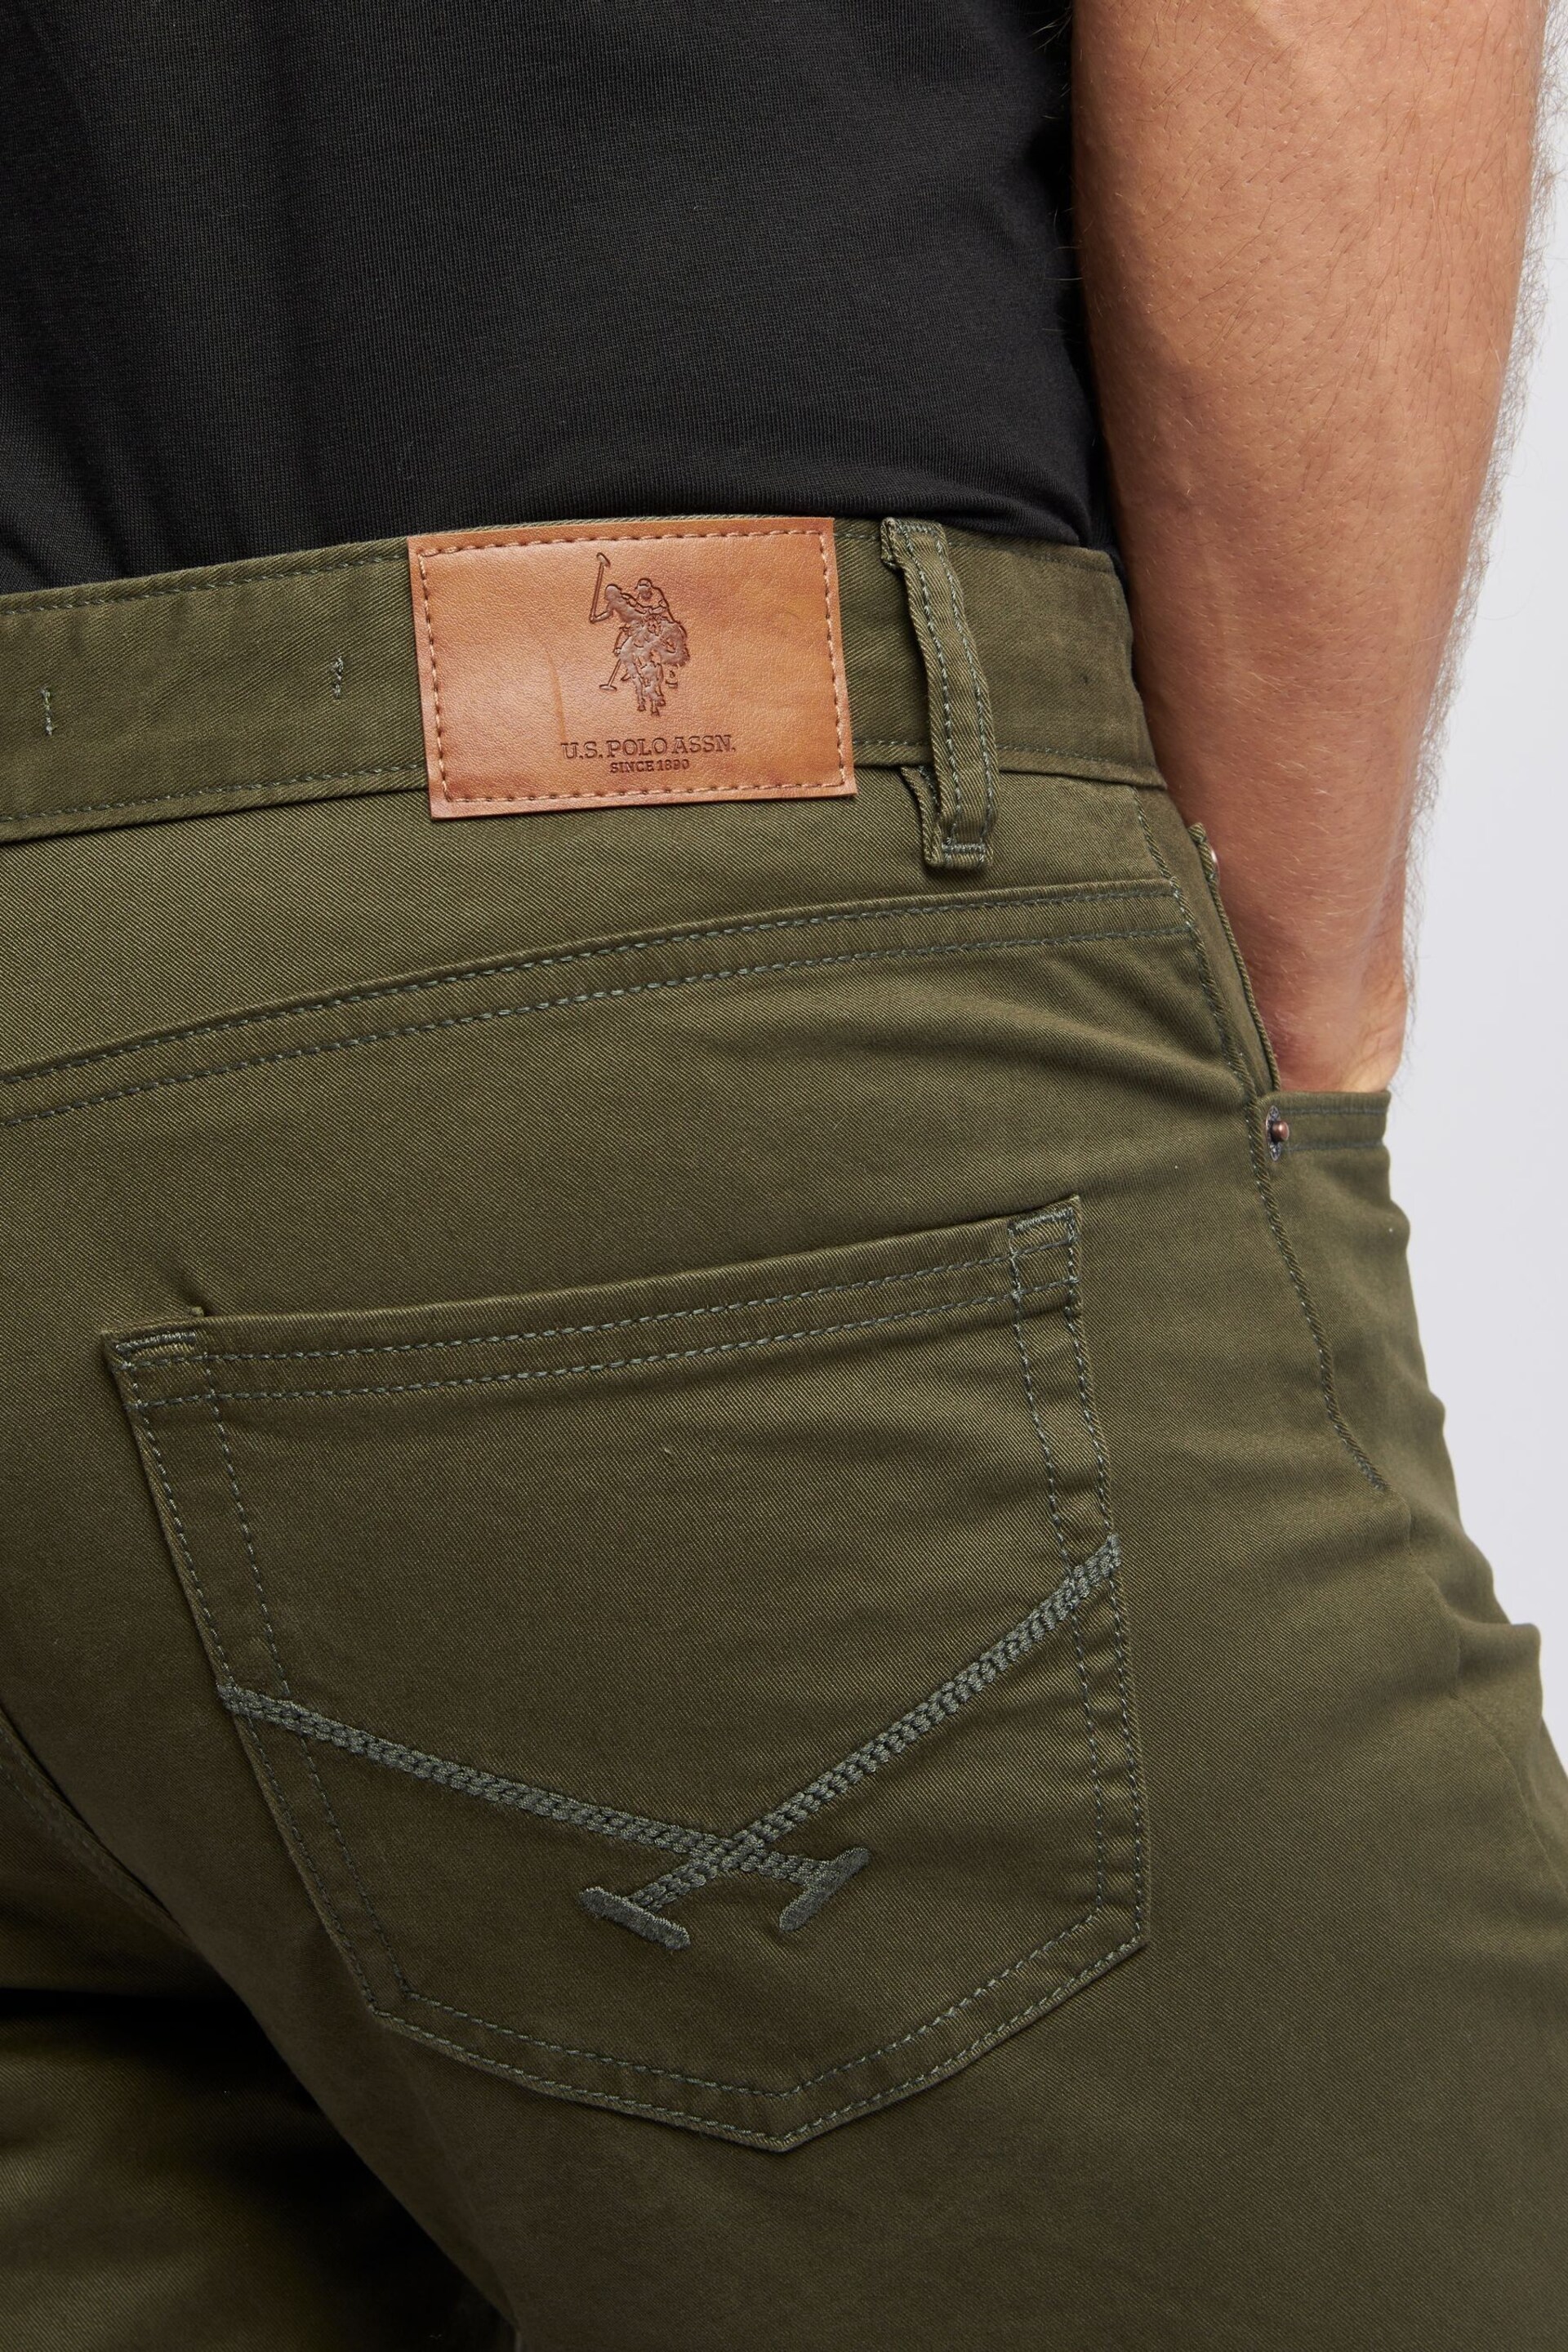 U.S. Polo Assn. Mens Core 5 Pocket Trousers - Image 6 of 9